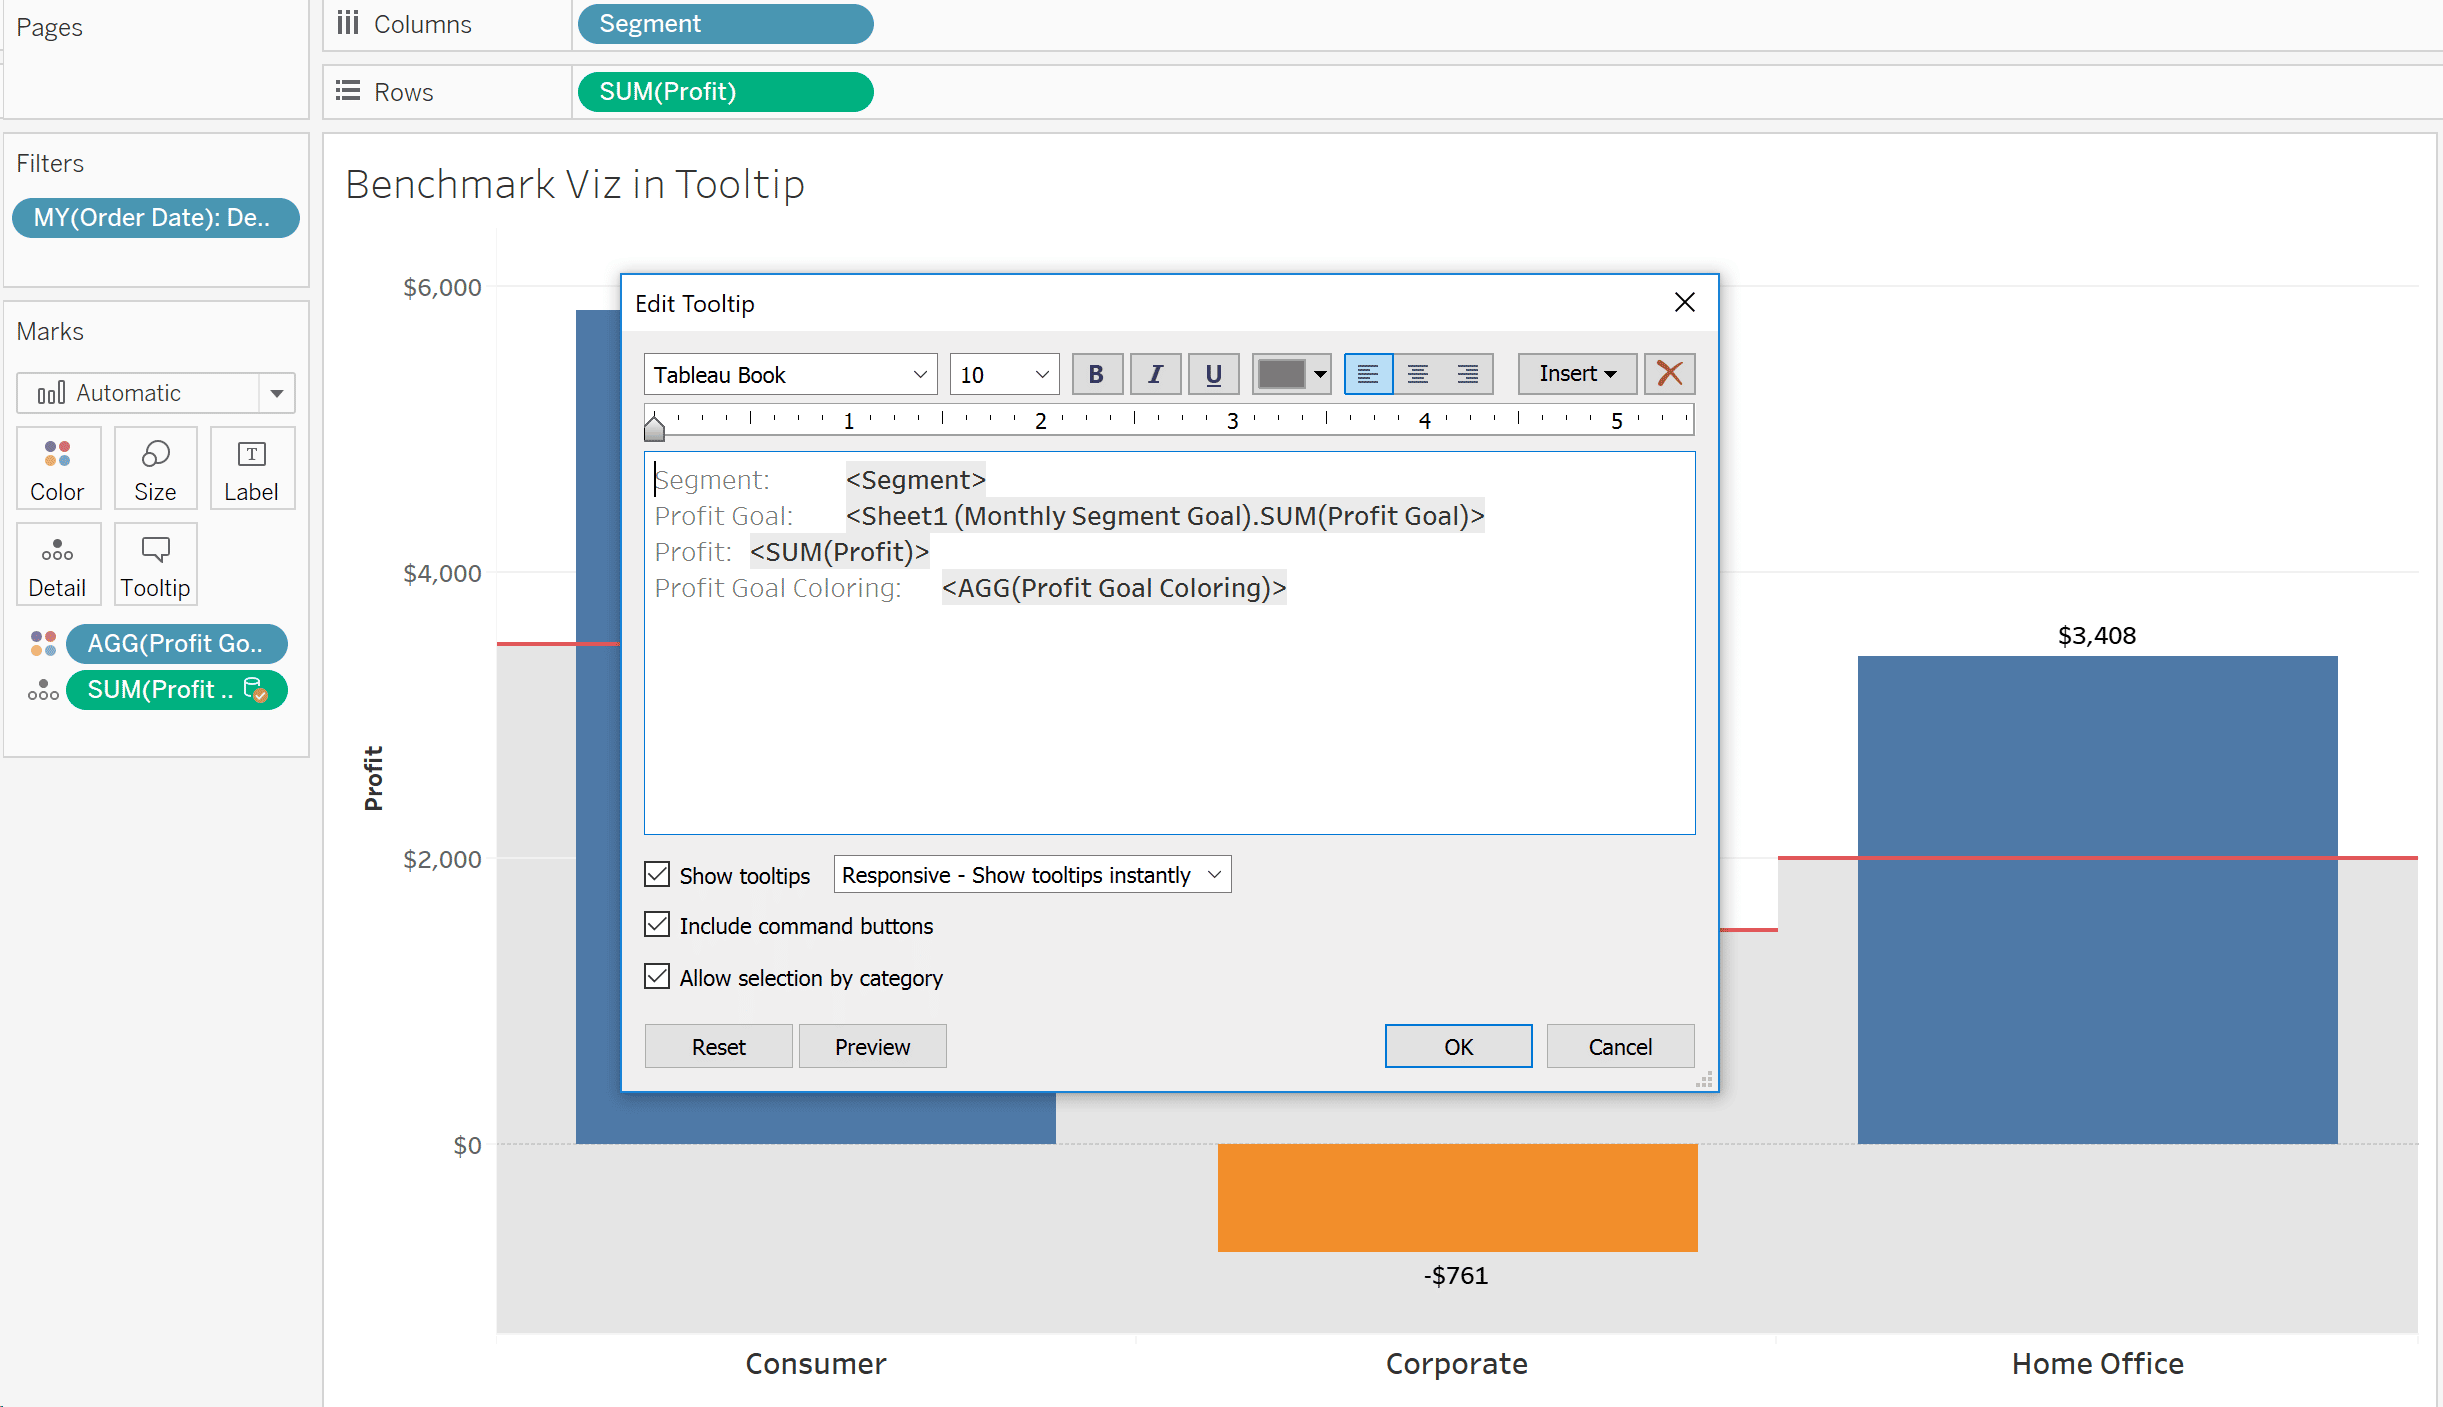 Open the Tooltip mark to benchmark in Tableau